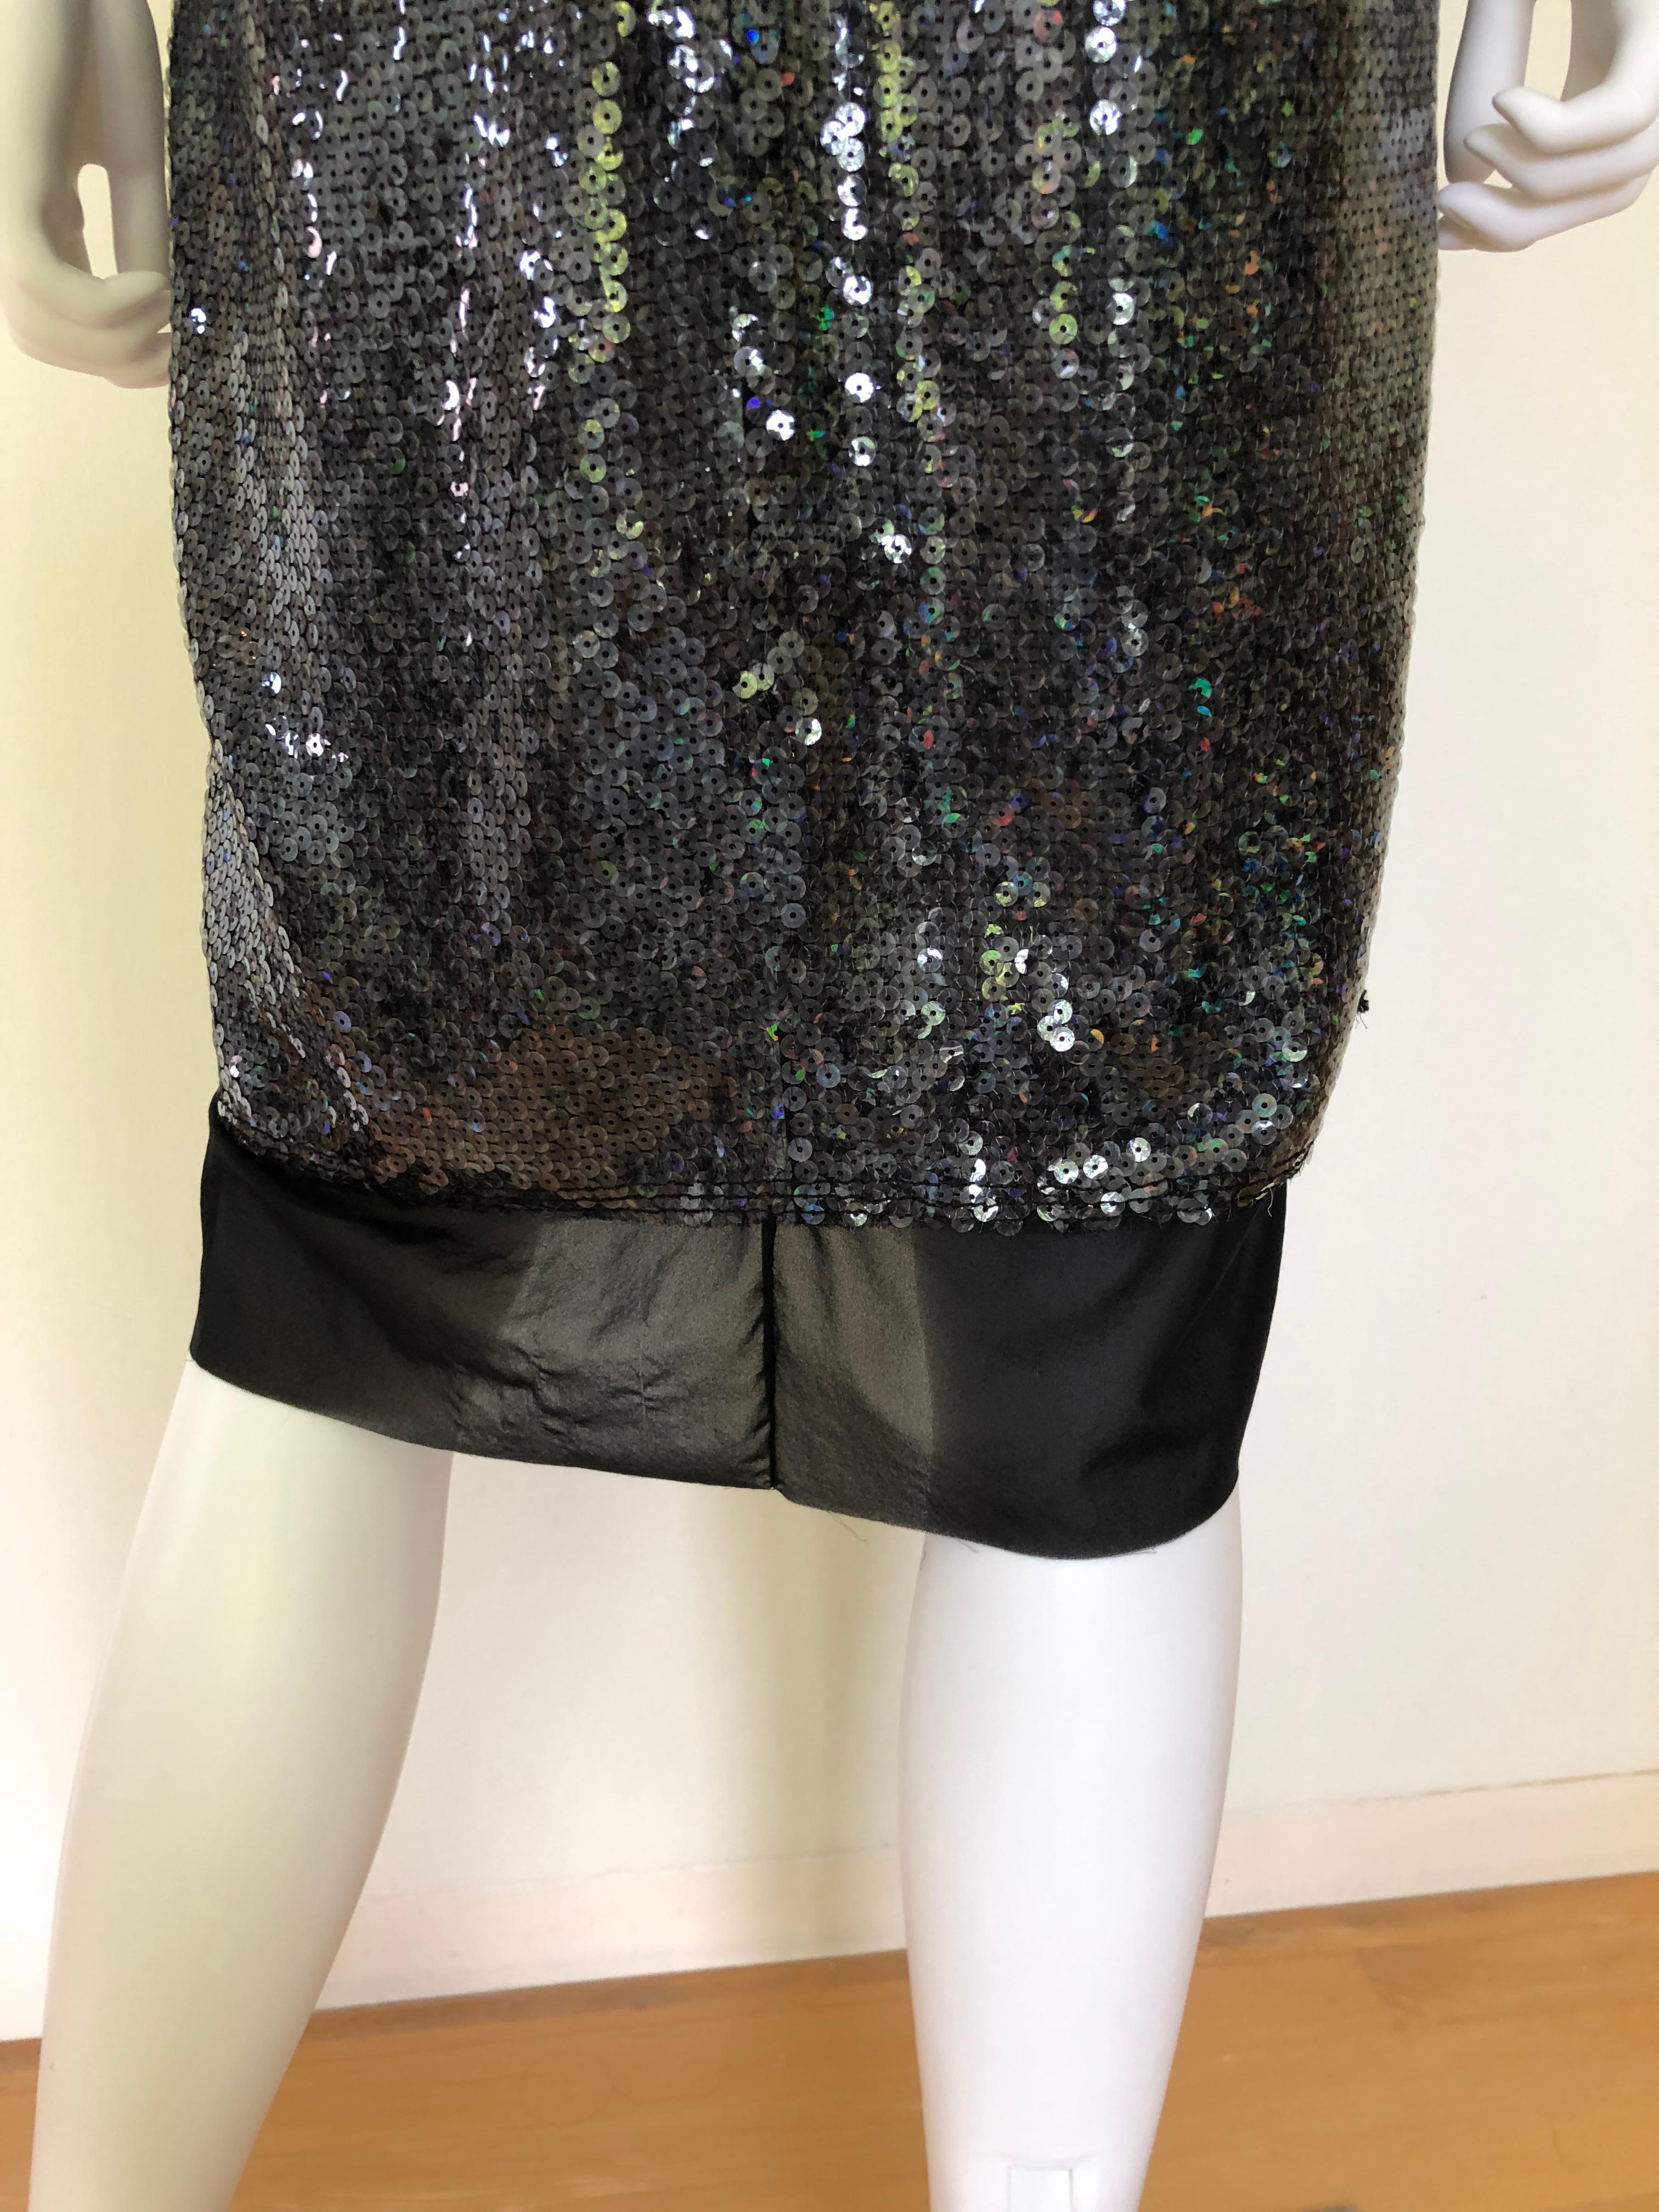 Marc Jacobs Black Sequin and Sheer Lingerie Bodice Sleeveless Cocktail Dress For Sale 7